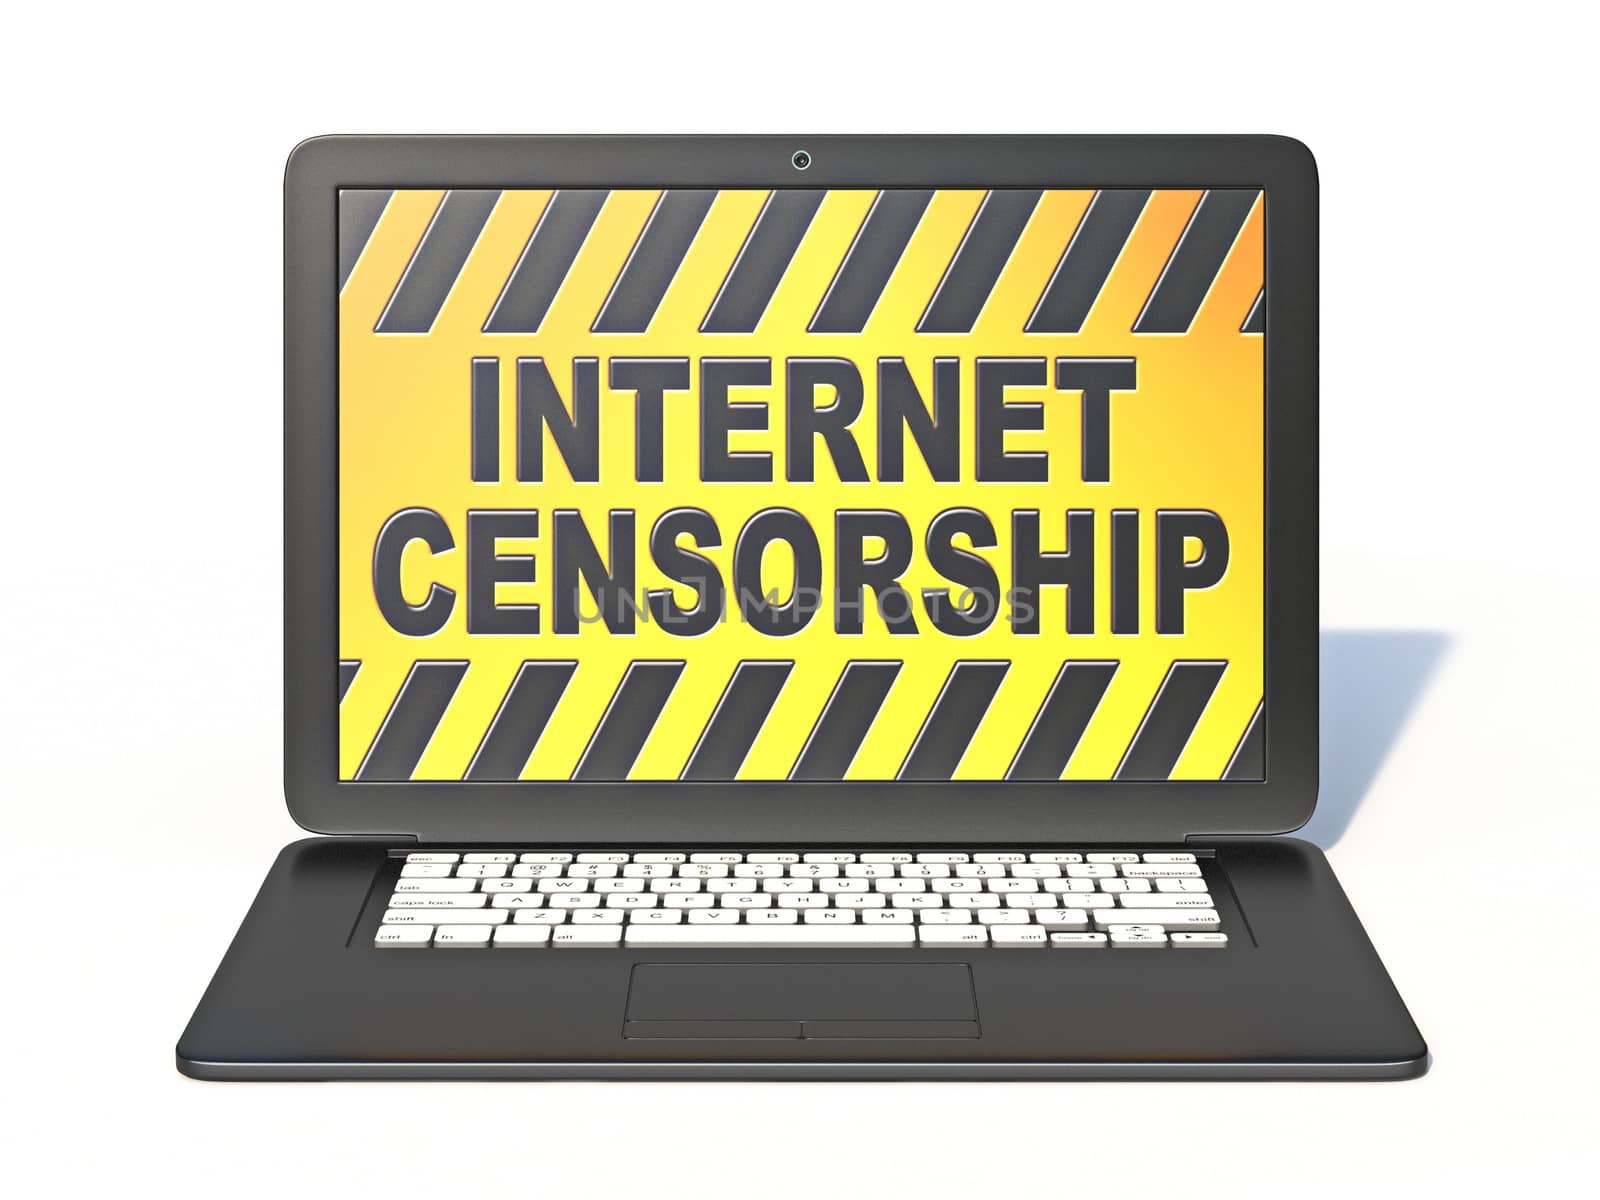 Black laptop with INTERNET CENSORSHIP sign on screen 3D rendering isolated on white background